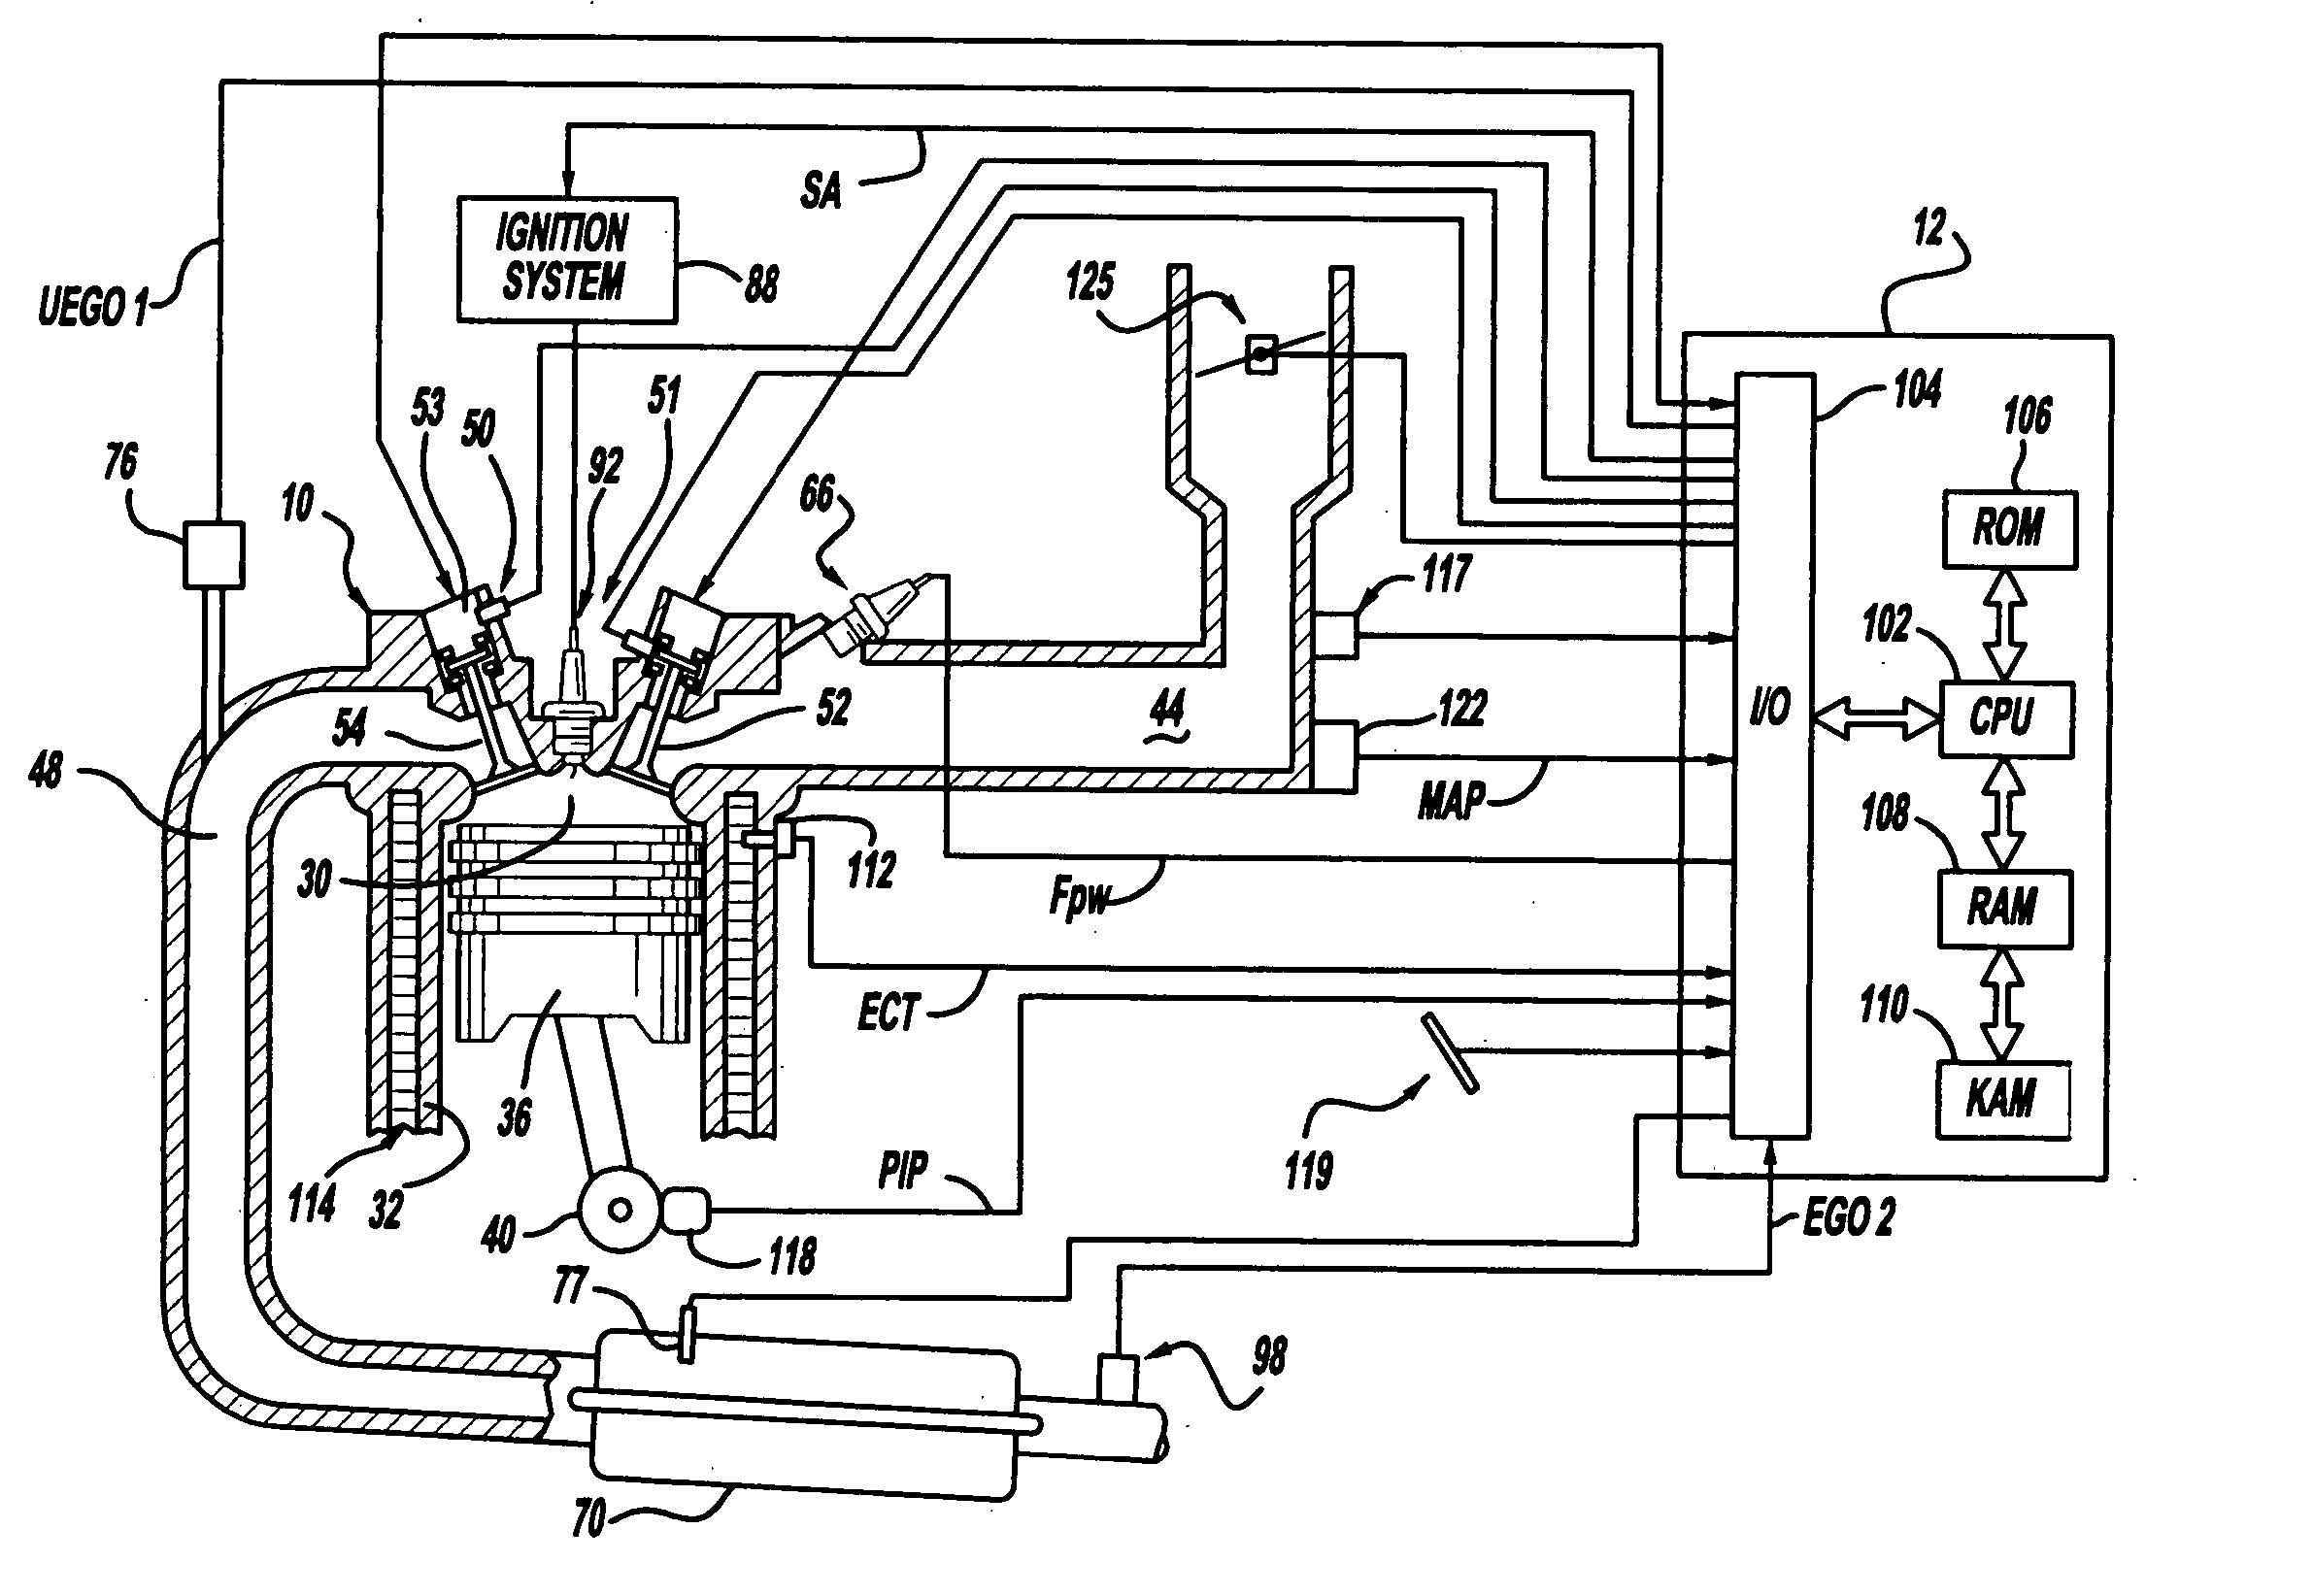 Engine air-fuel control for an engine with valves that may be deactivated